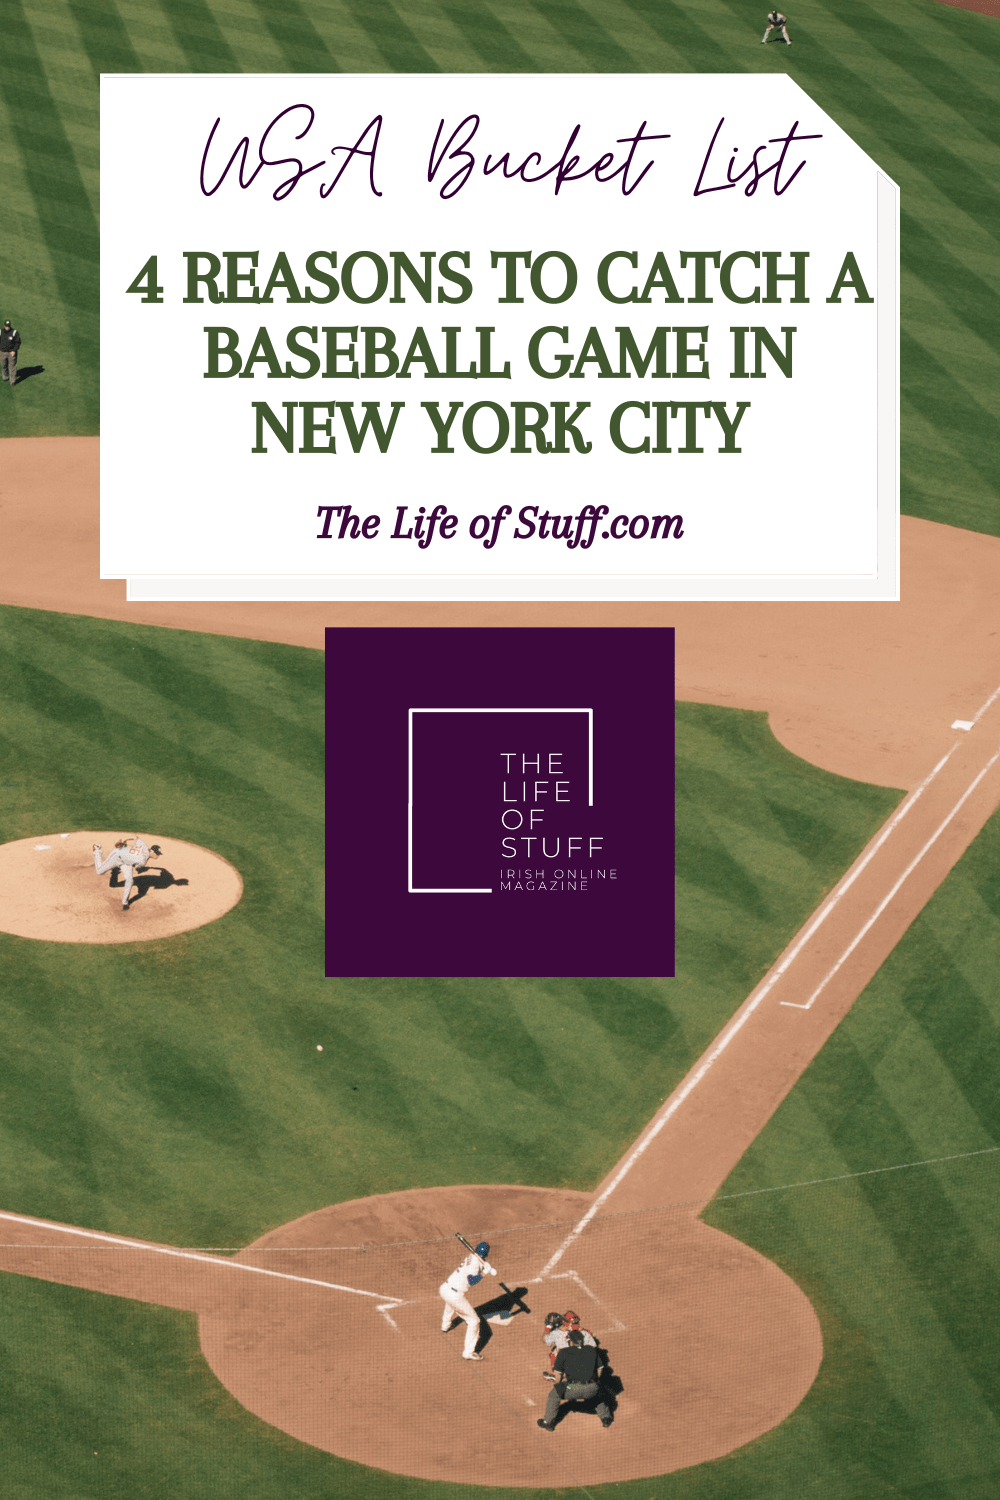 USA Bucket List - Reasons to Catch a Baseball Game in NYC - The Life of Stuff